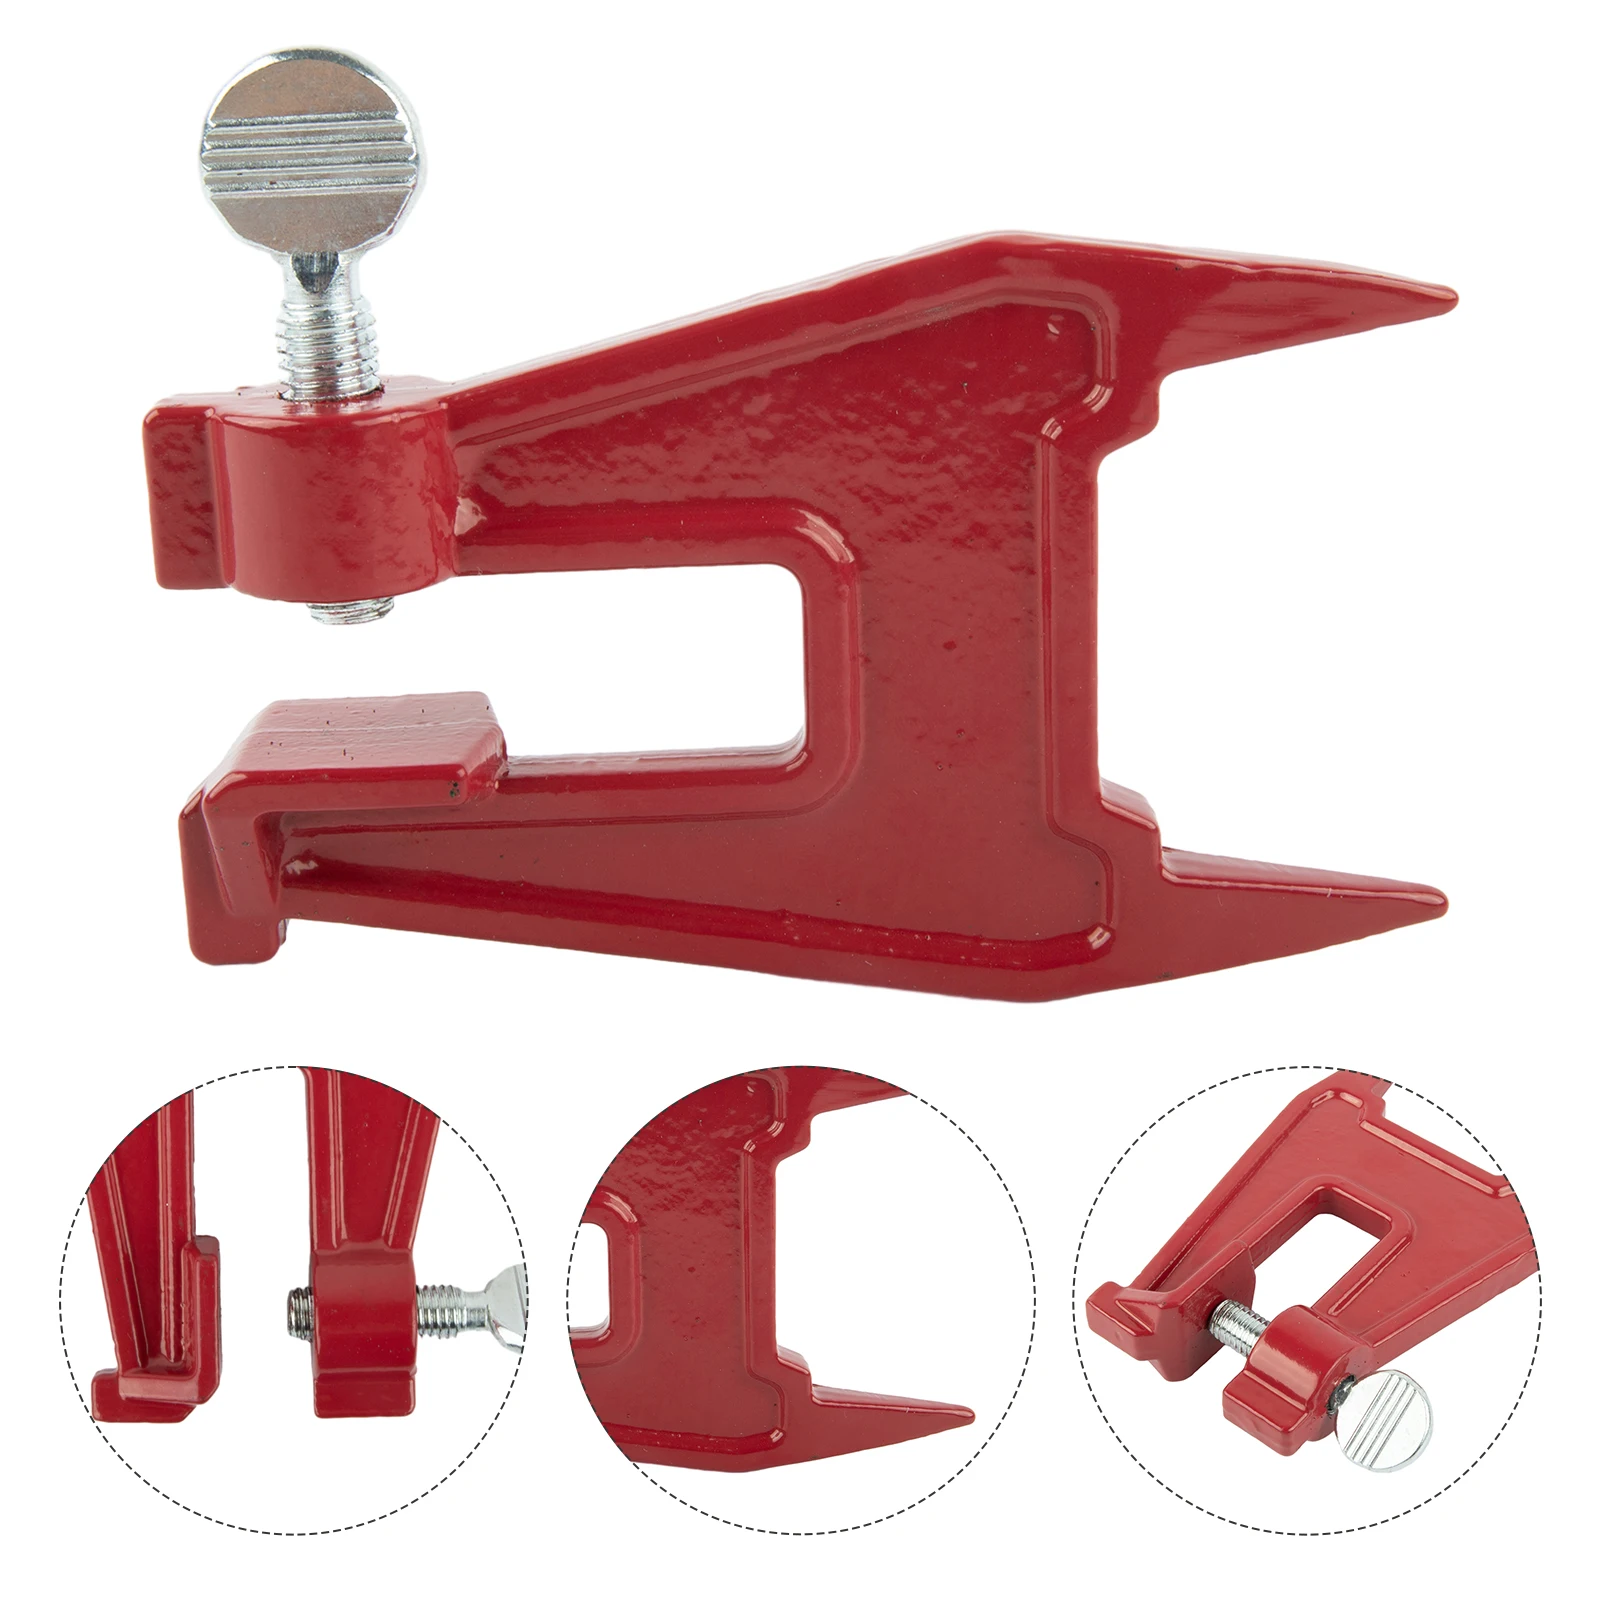 

Saws Sword Holder Saw Blade Sharpener 1pcs Manganese Steel Robust Stable For Fixing The Chainsaw Sword Durable